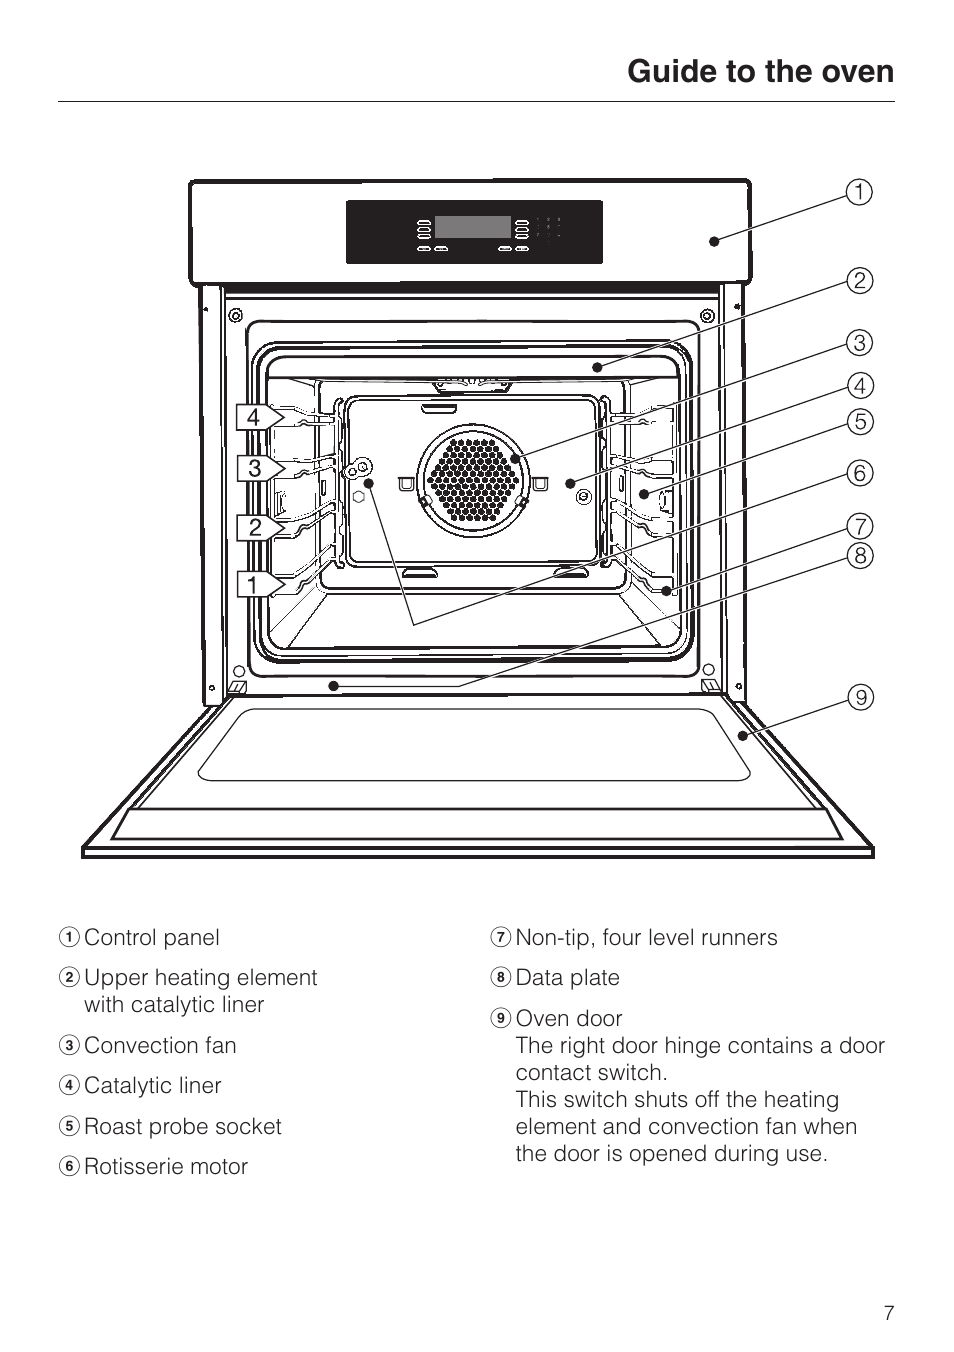 Guide to the oven 7, Guide to the oven | Miele H4680B User Manual